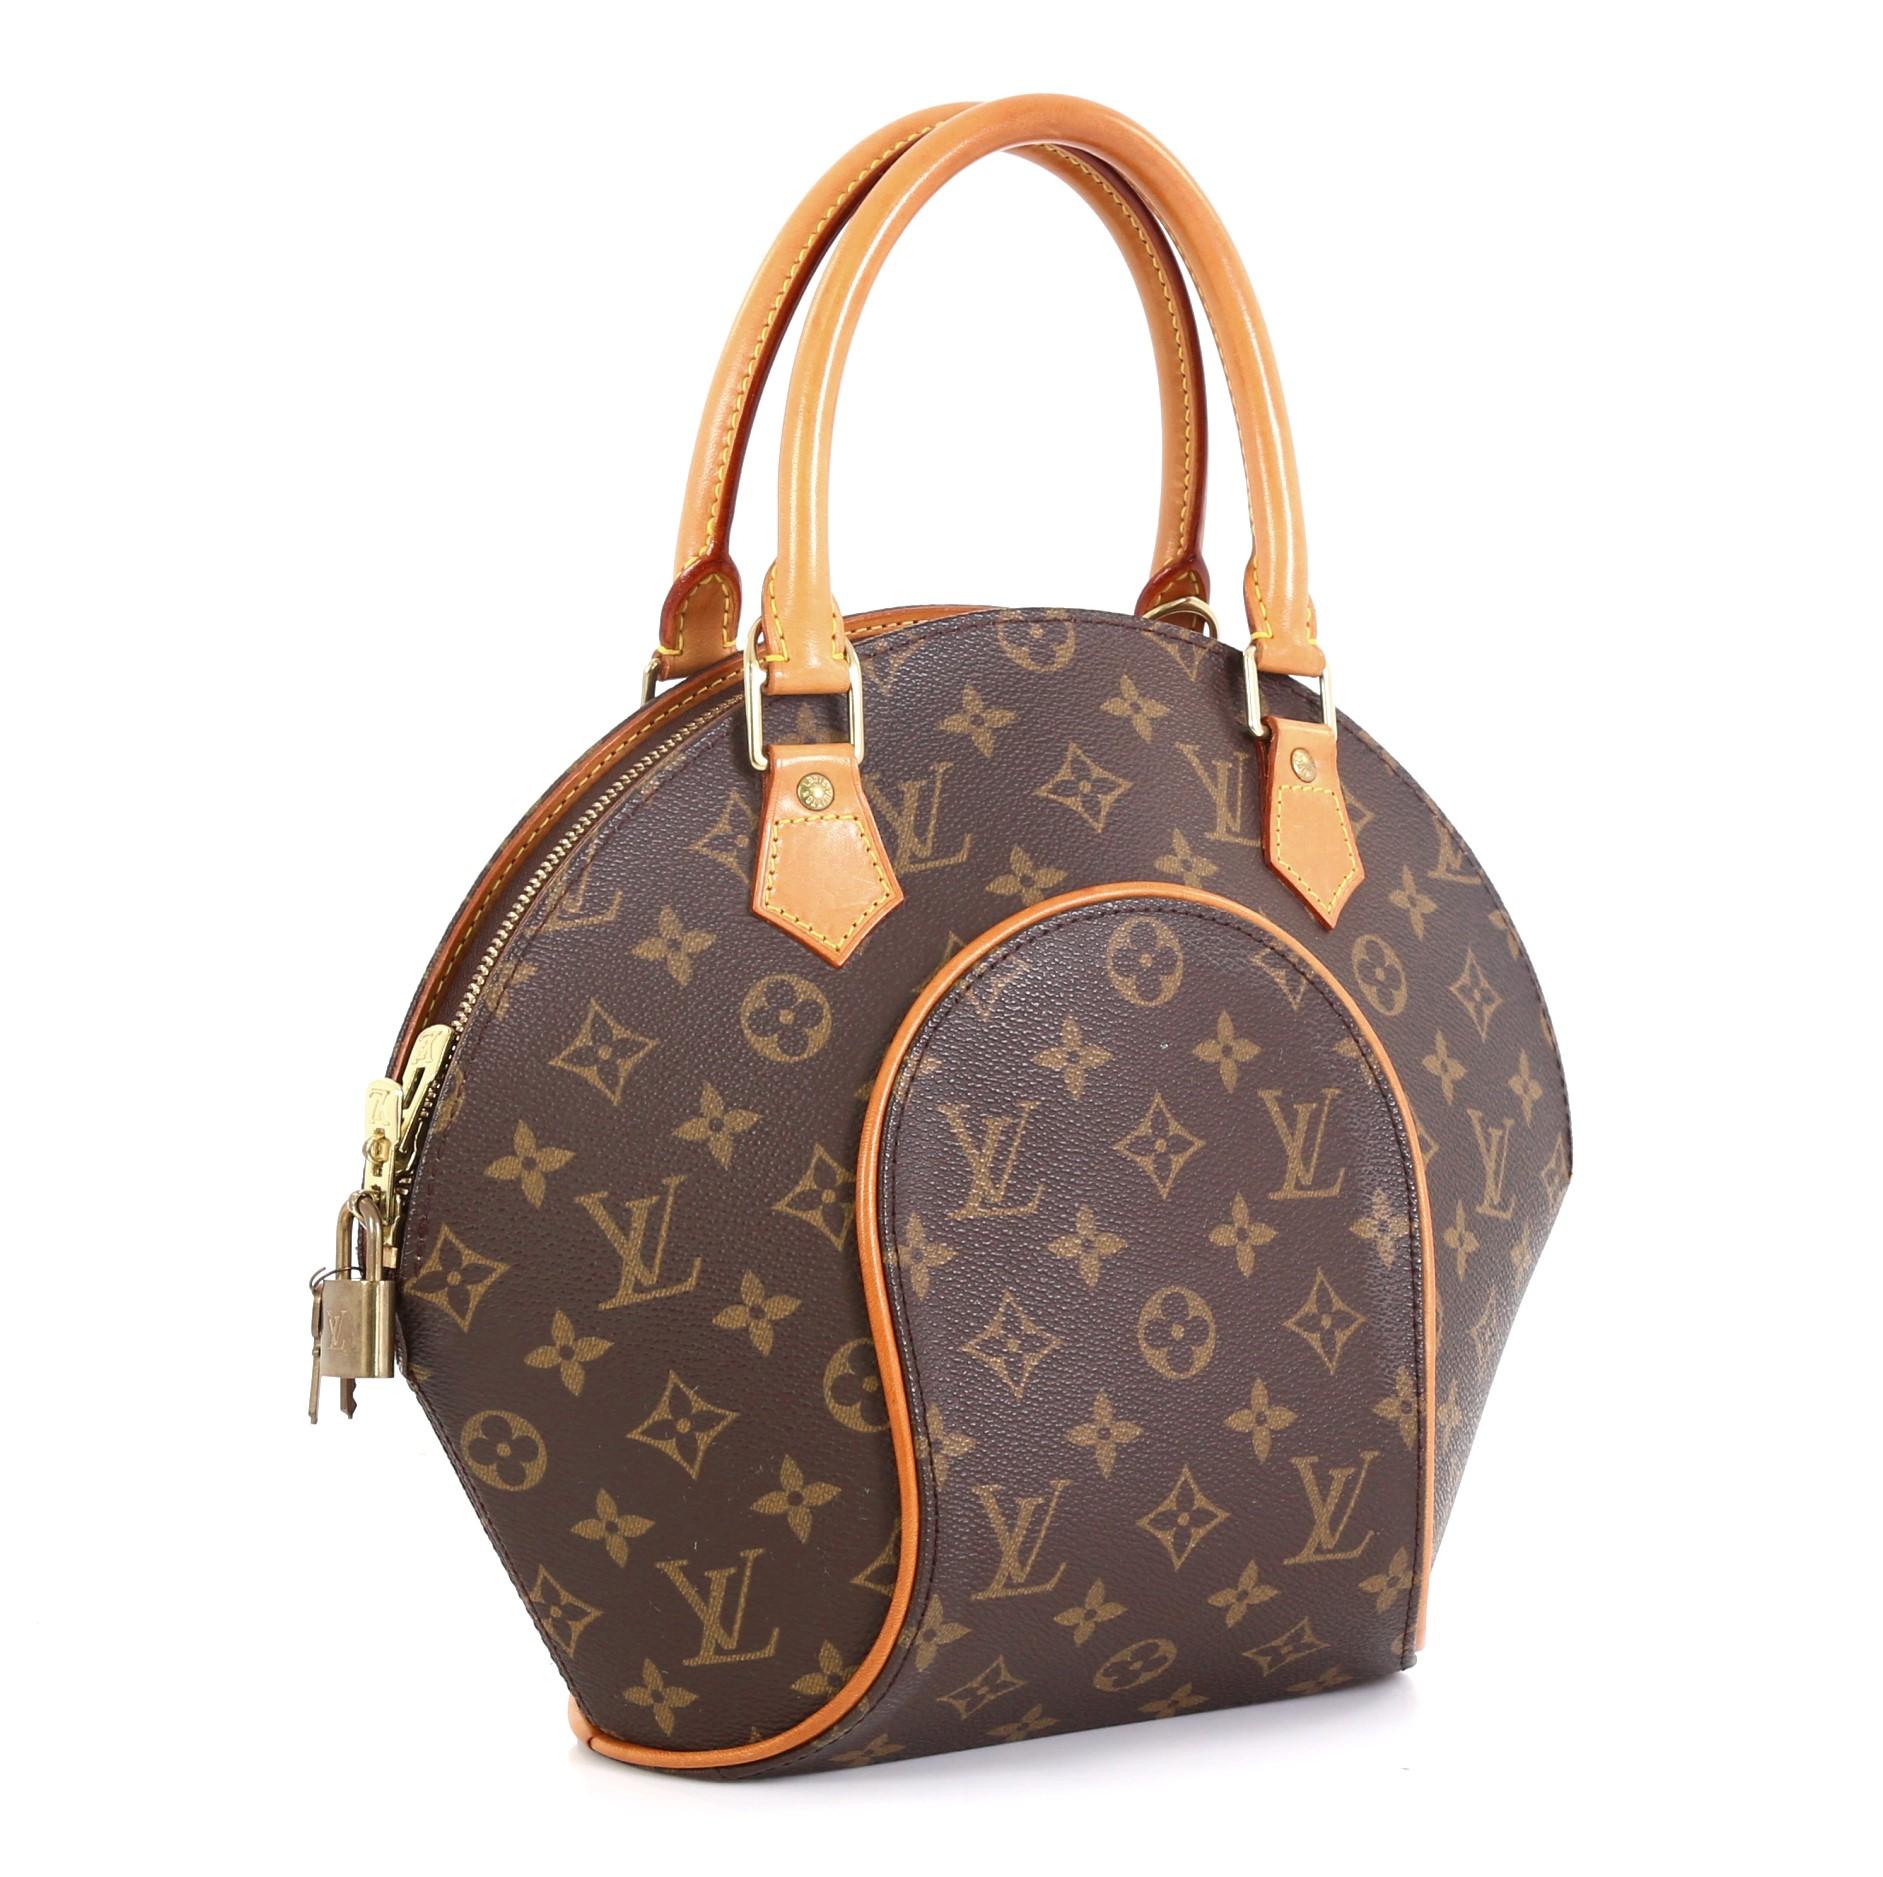 This Louis Vuitton Ellipse Bag Monogram Canvas PM, crafted from brown monogram coated canvas, features natural cowhide leather pipings, dual rolled handles, and gold-tone hardware. Its zip closure opens to a brown fabric interior with side slip